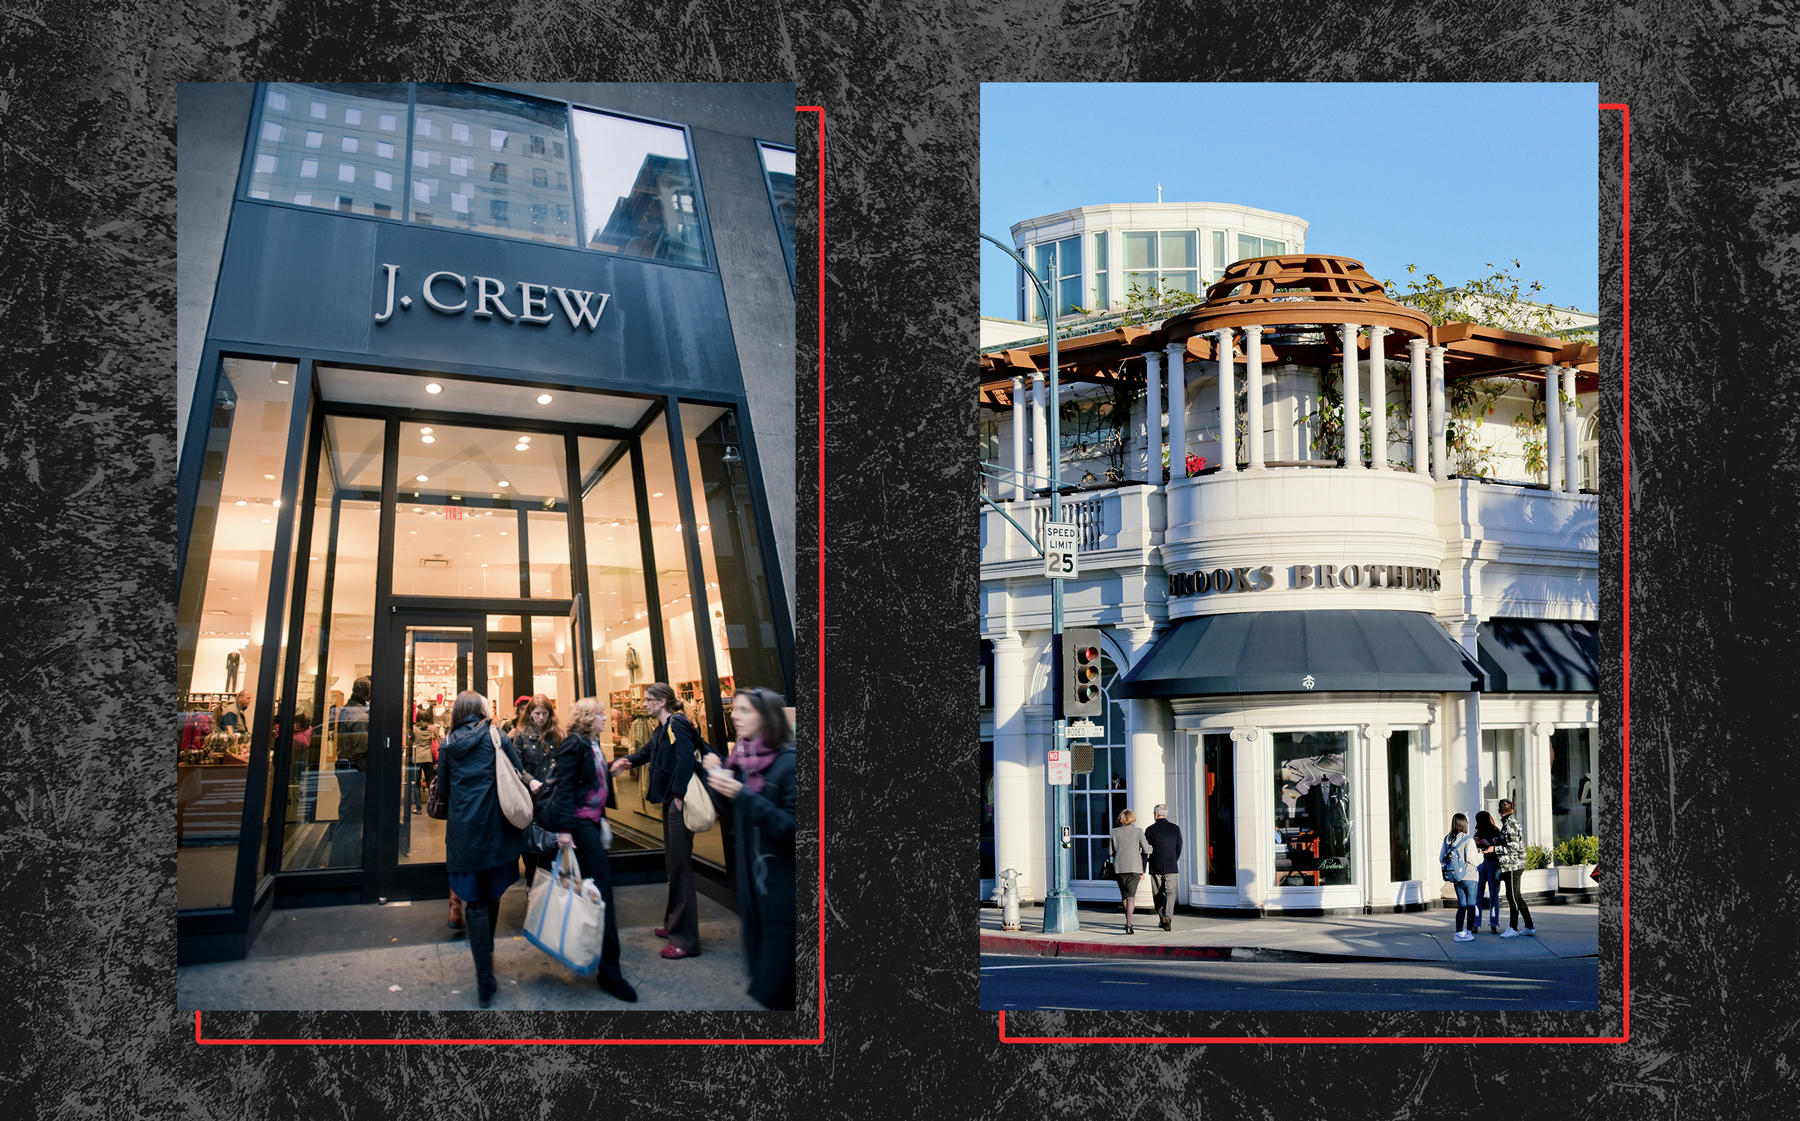 A J. Crew storefront on Madison Avenue in New York and a Brooks Brothers store in Beverly Hills, California (Credit: Richard Levine/Corbis and FG/Bauer-Griffin/GC Images)